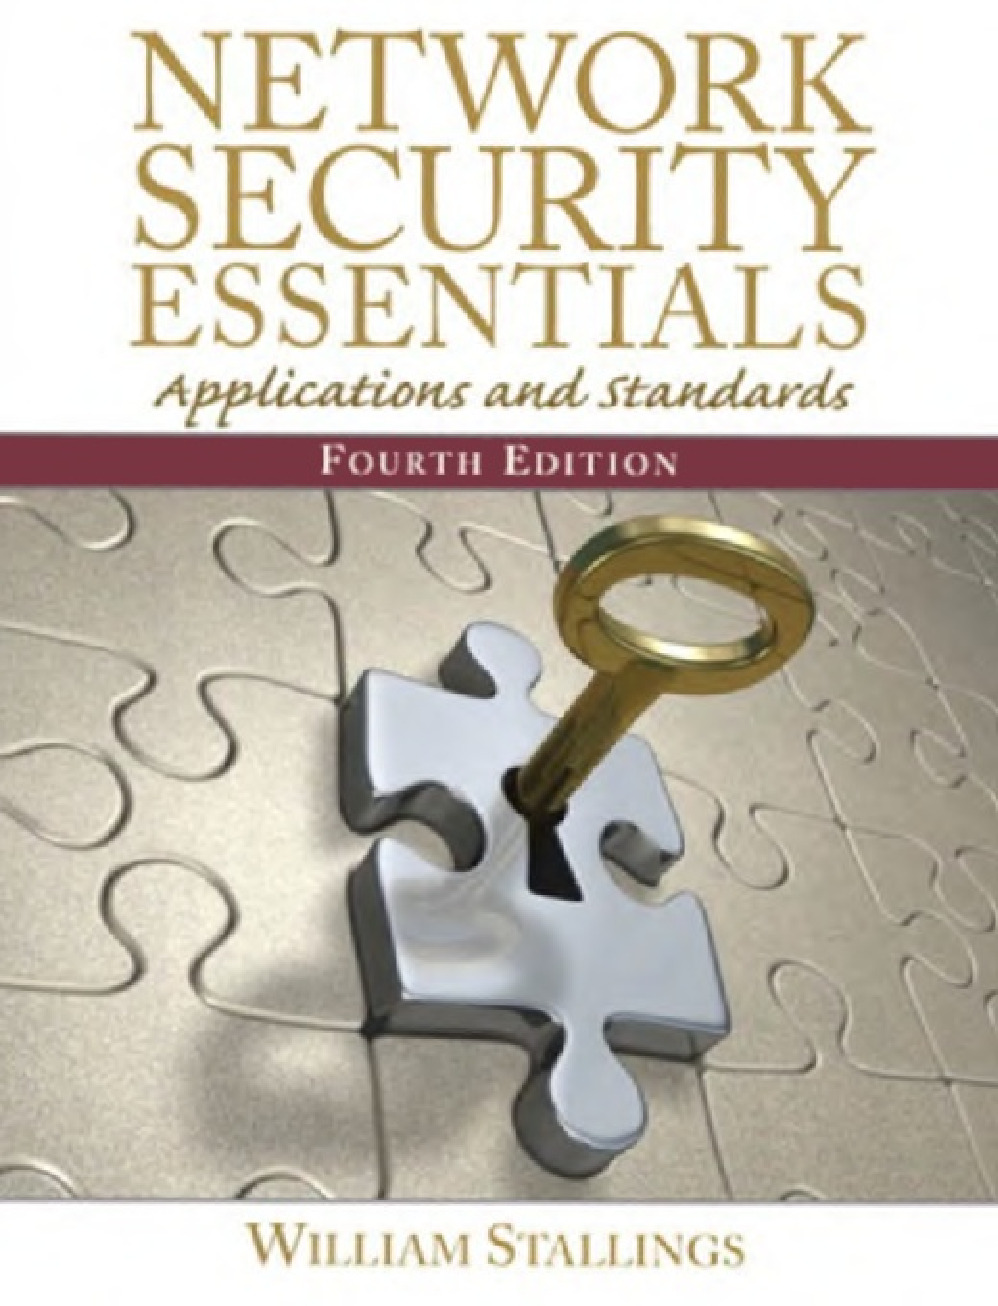 Network Security Essentials 4th Edition